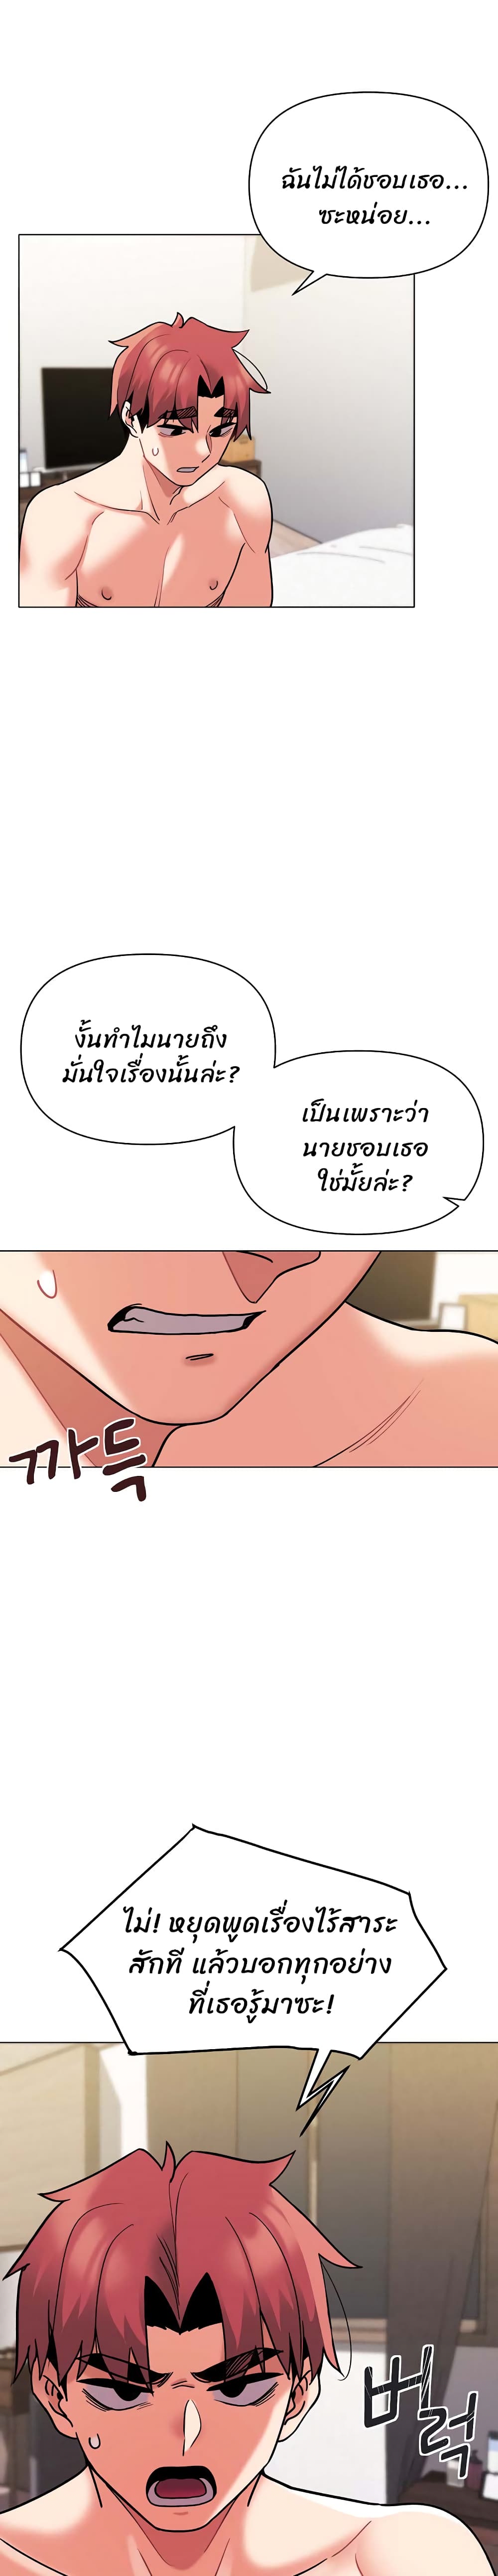 College Life Starts With Clubs 49 ภาพที่ 5